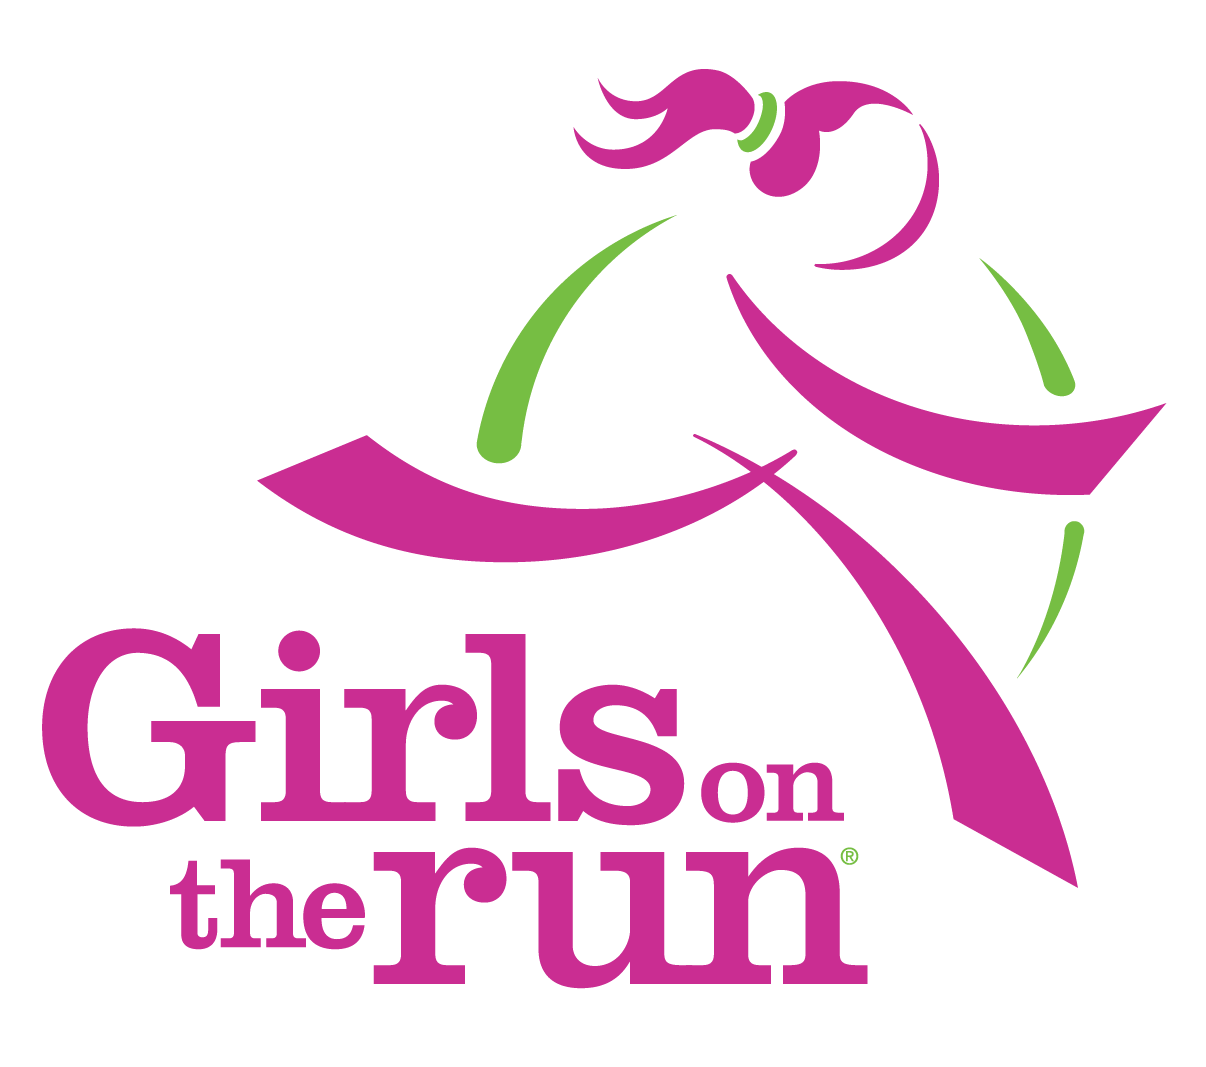 Girls on the Run logo in primary pink with green accents